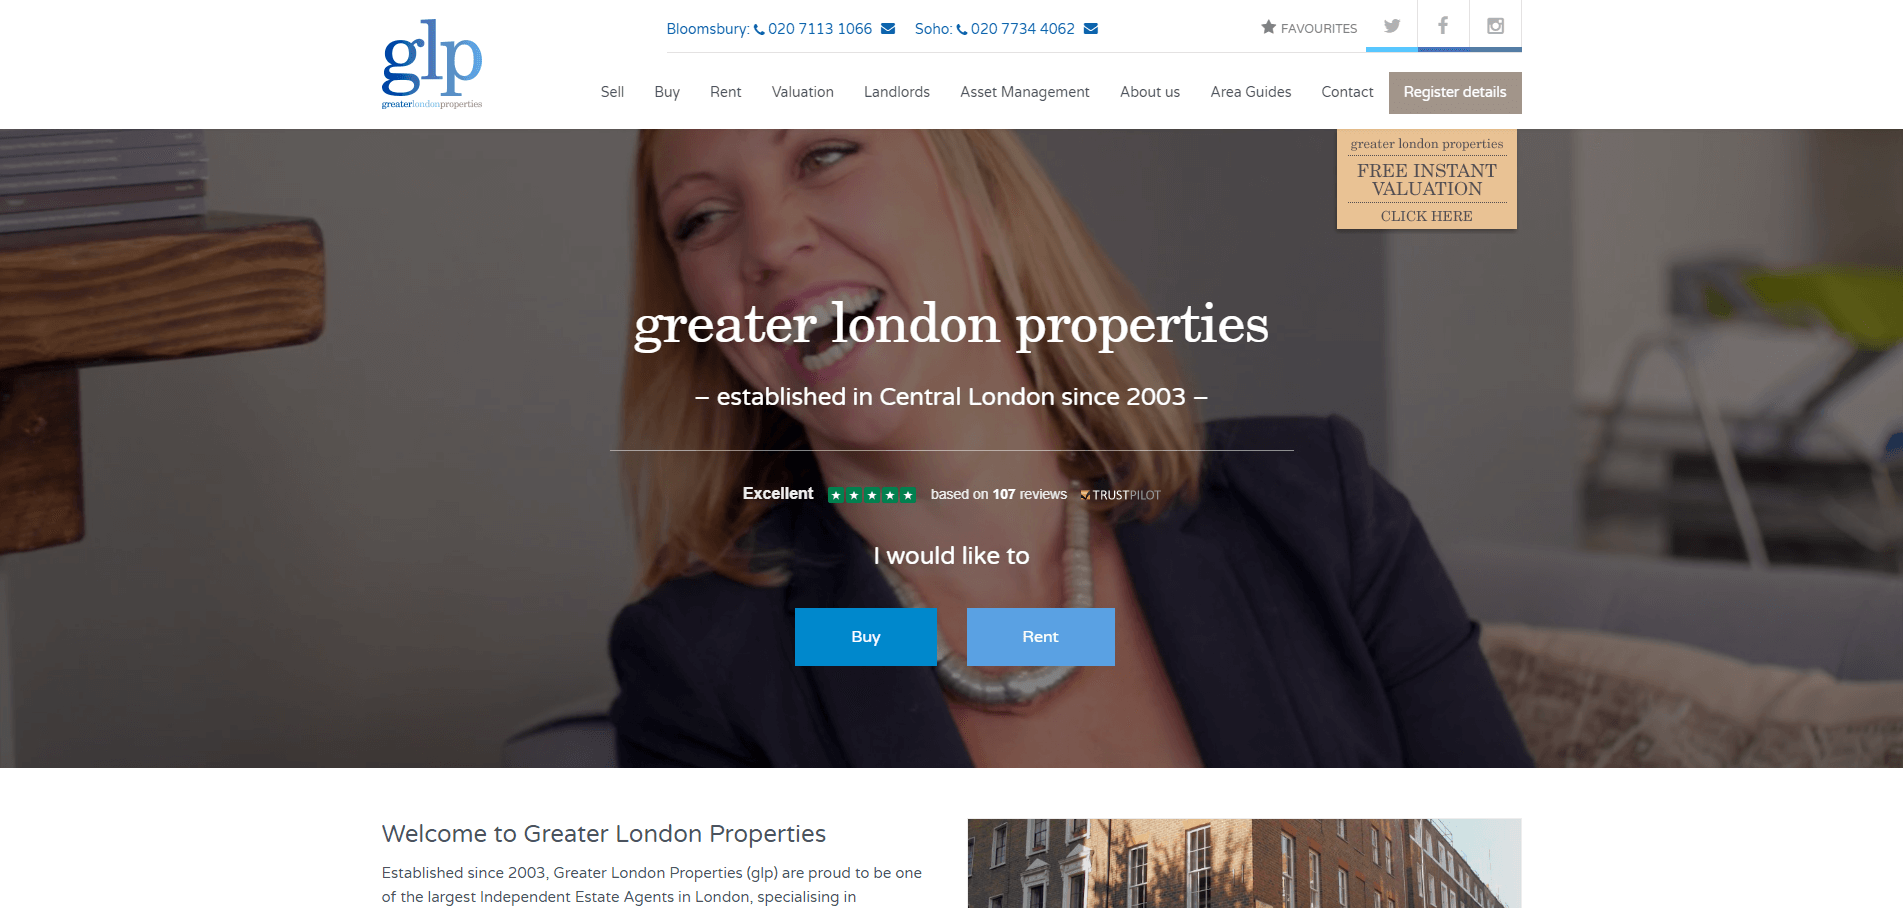  Awesome!  We listed 101 of the best real estate websites.  We reviewed and ranked each site, 1-101.  Here's greaterlondonproperties.co.uk.  Who made the cut? 